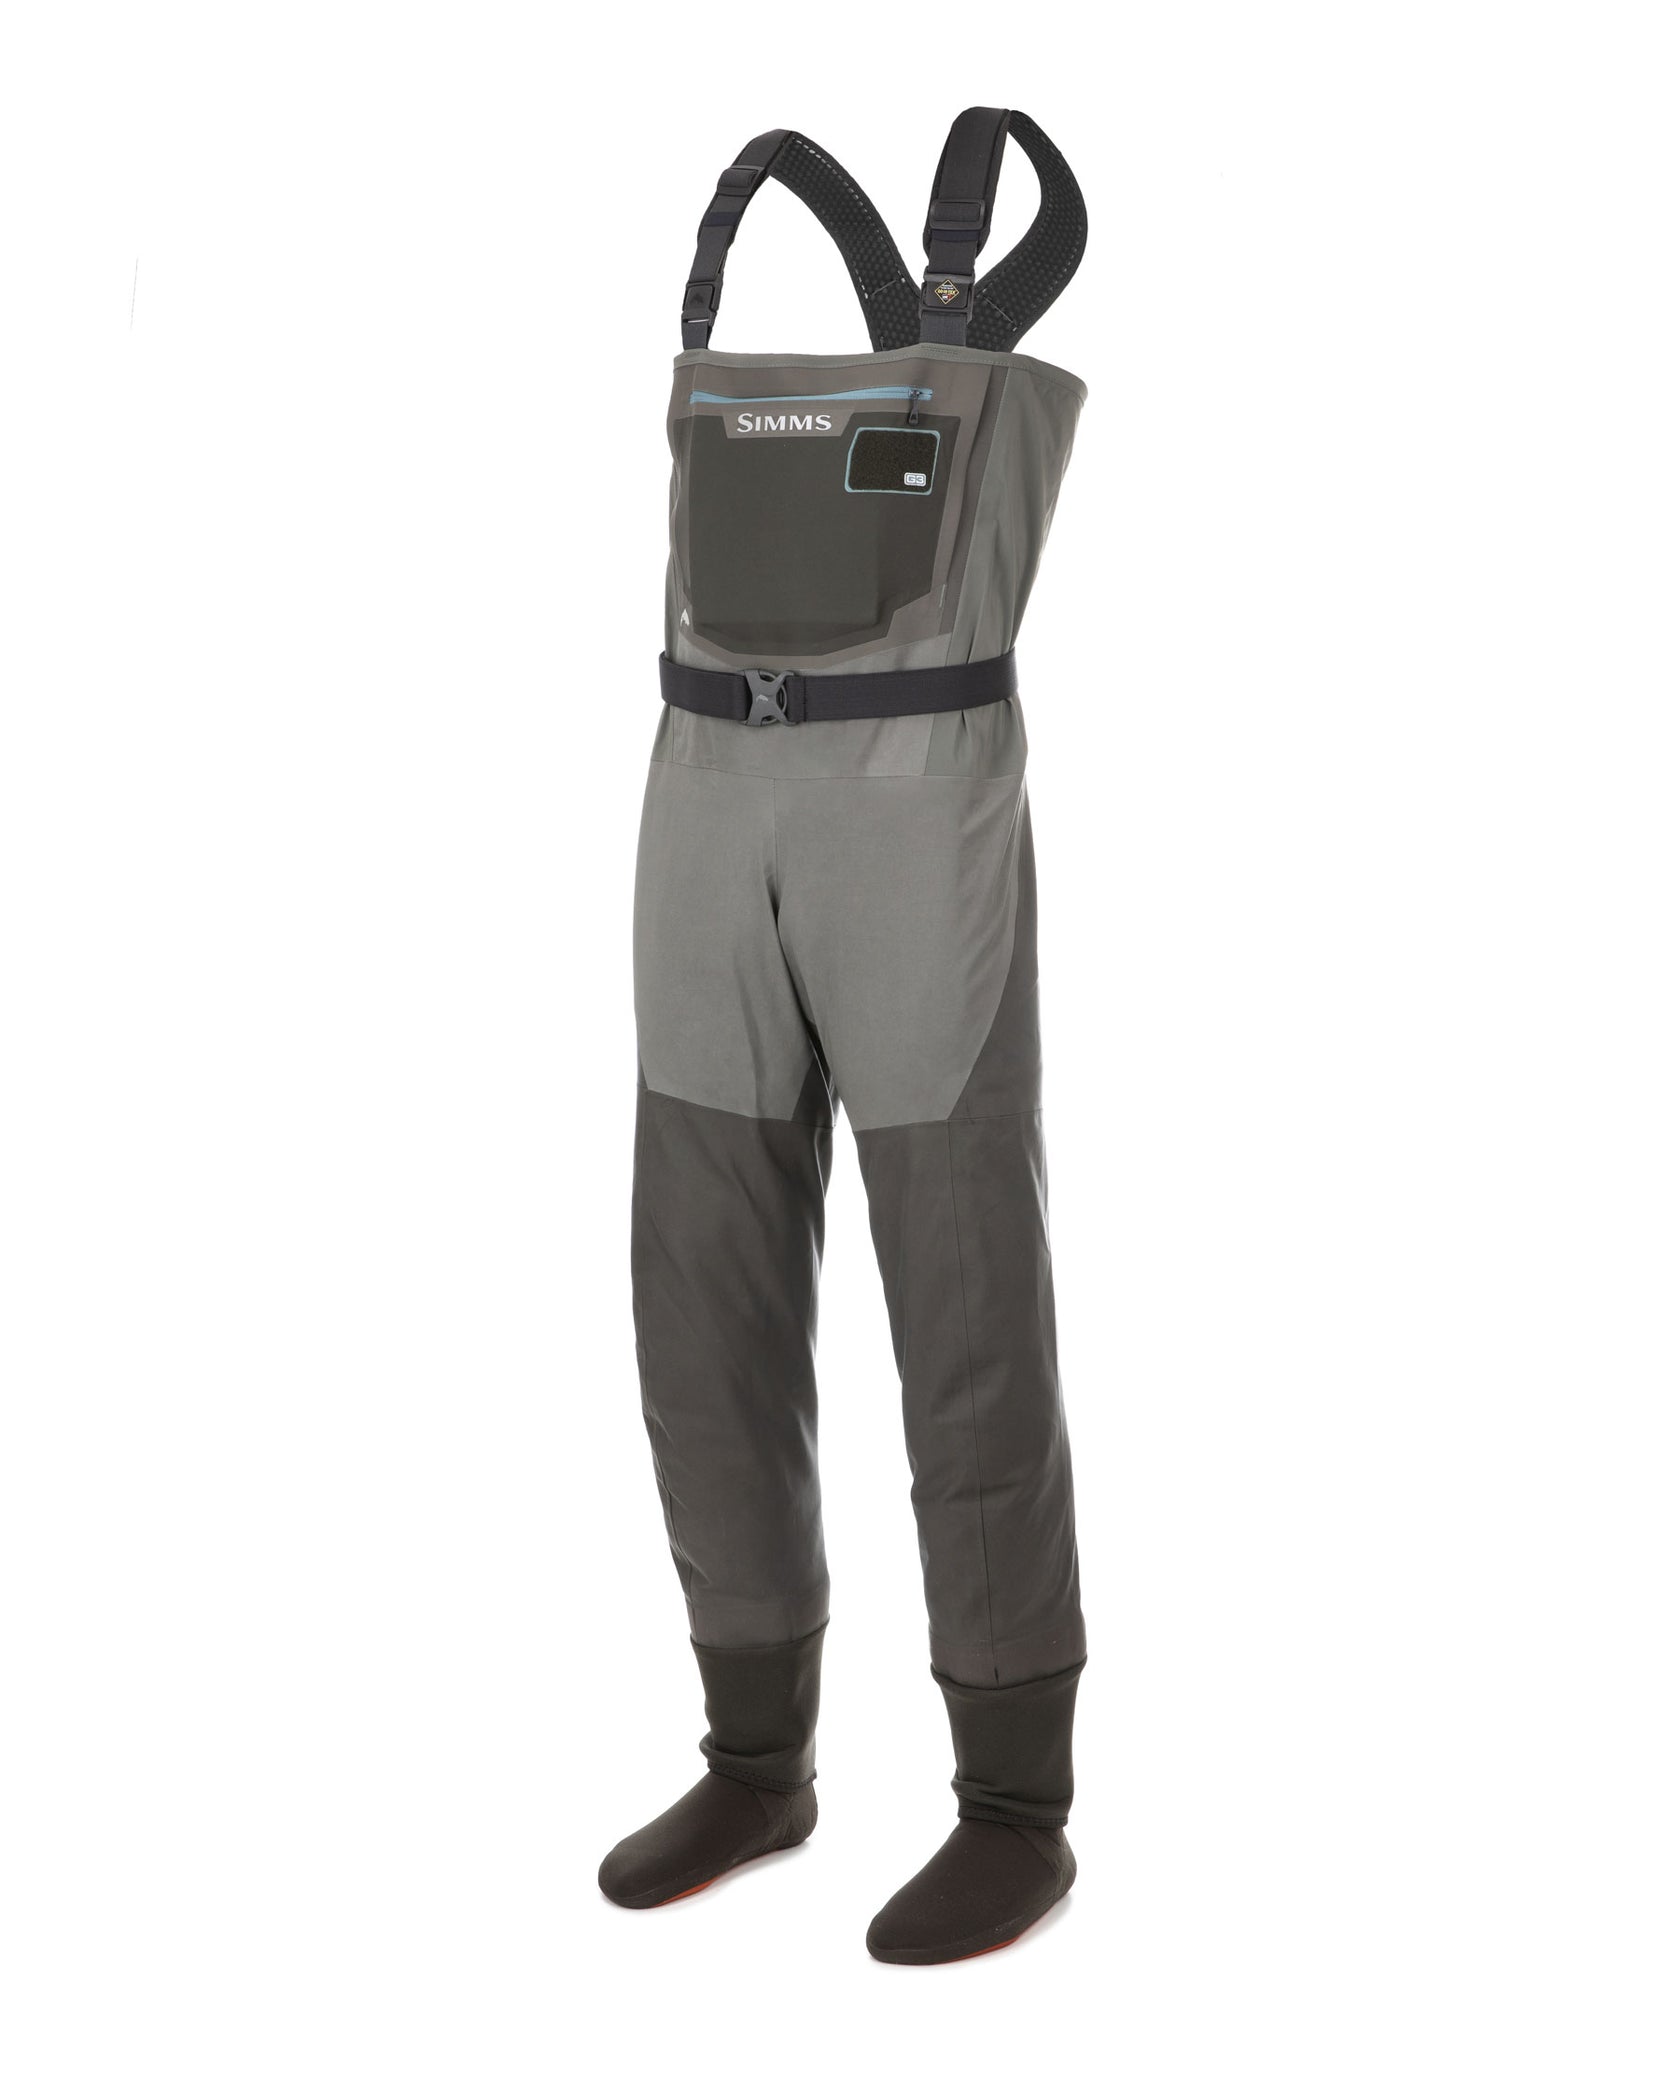 Simms W's G3 Guide Waders - XL